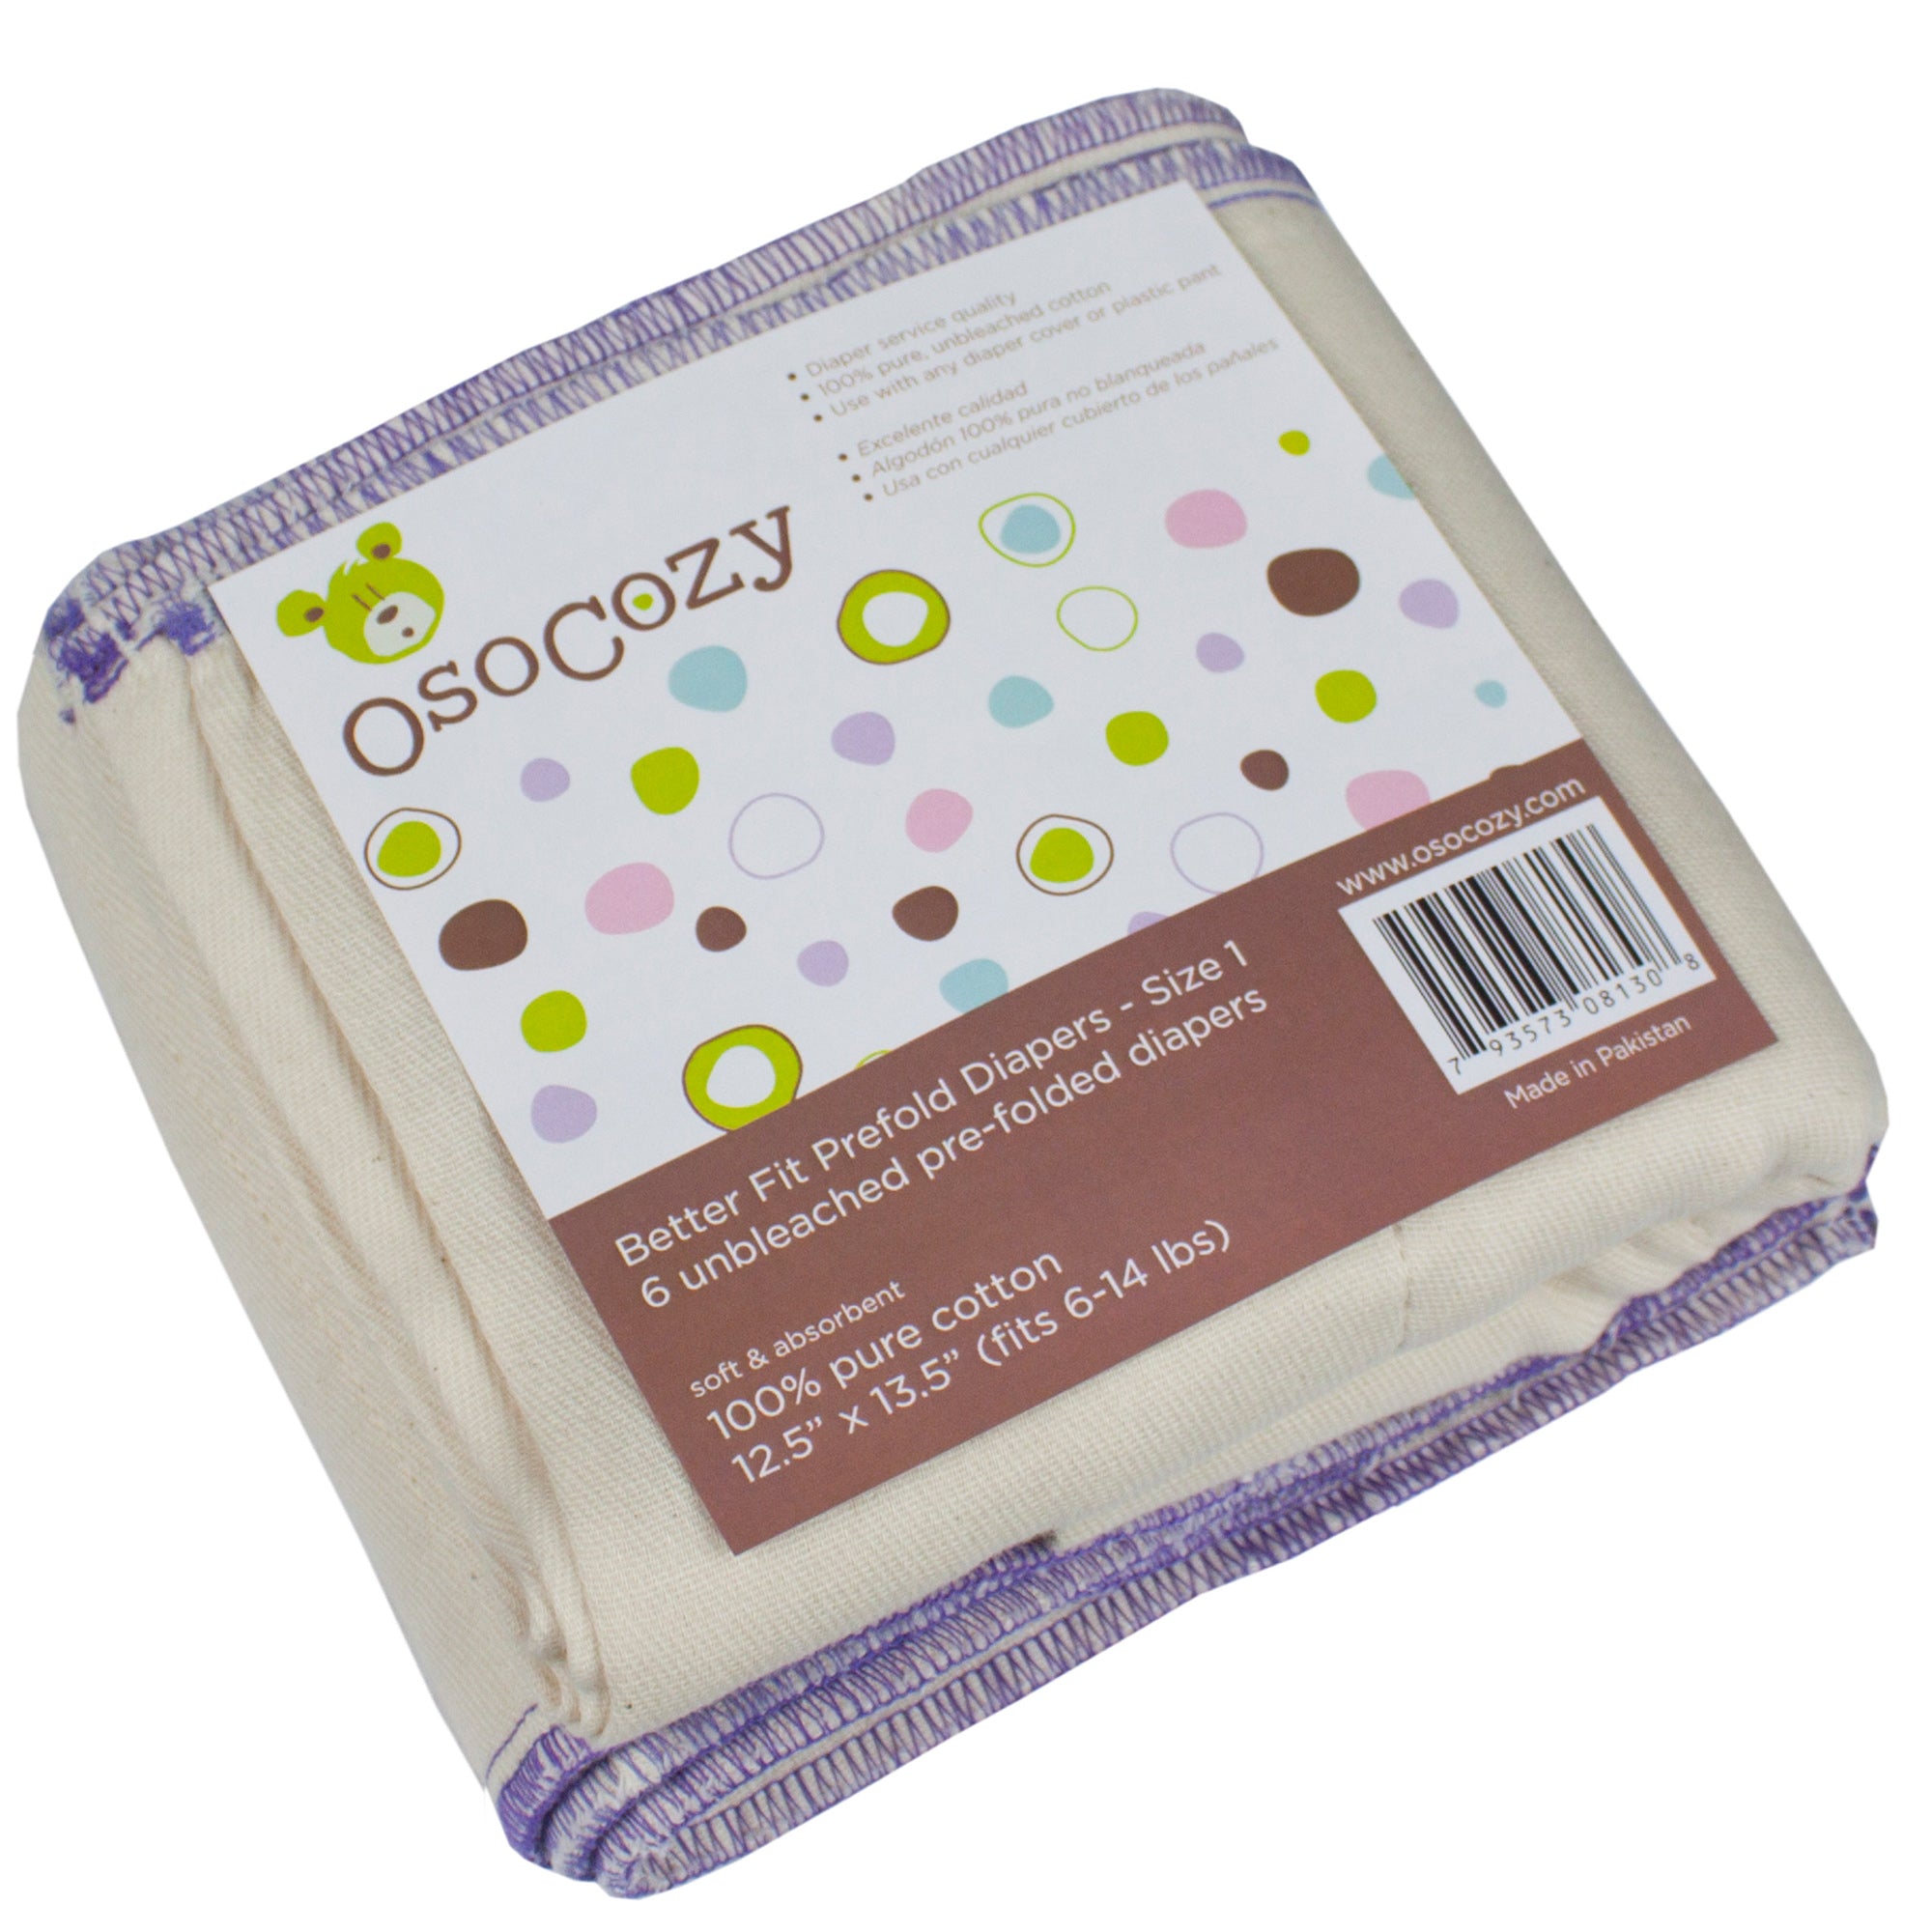 OsoCozy Better Fit Diapers - 6 packs